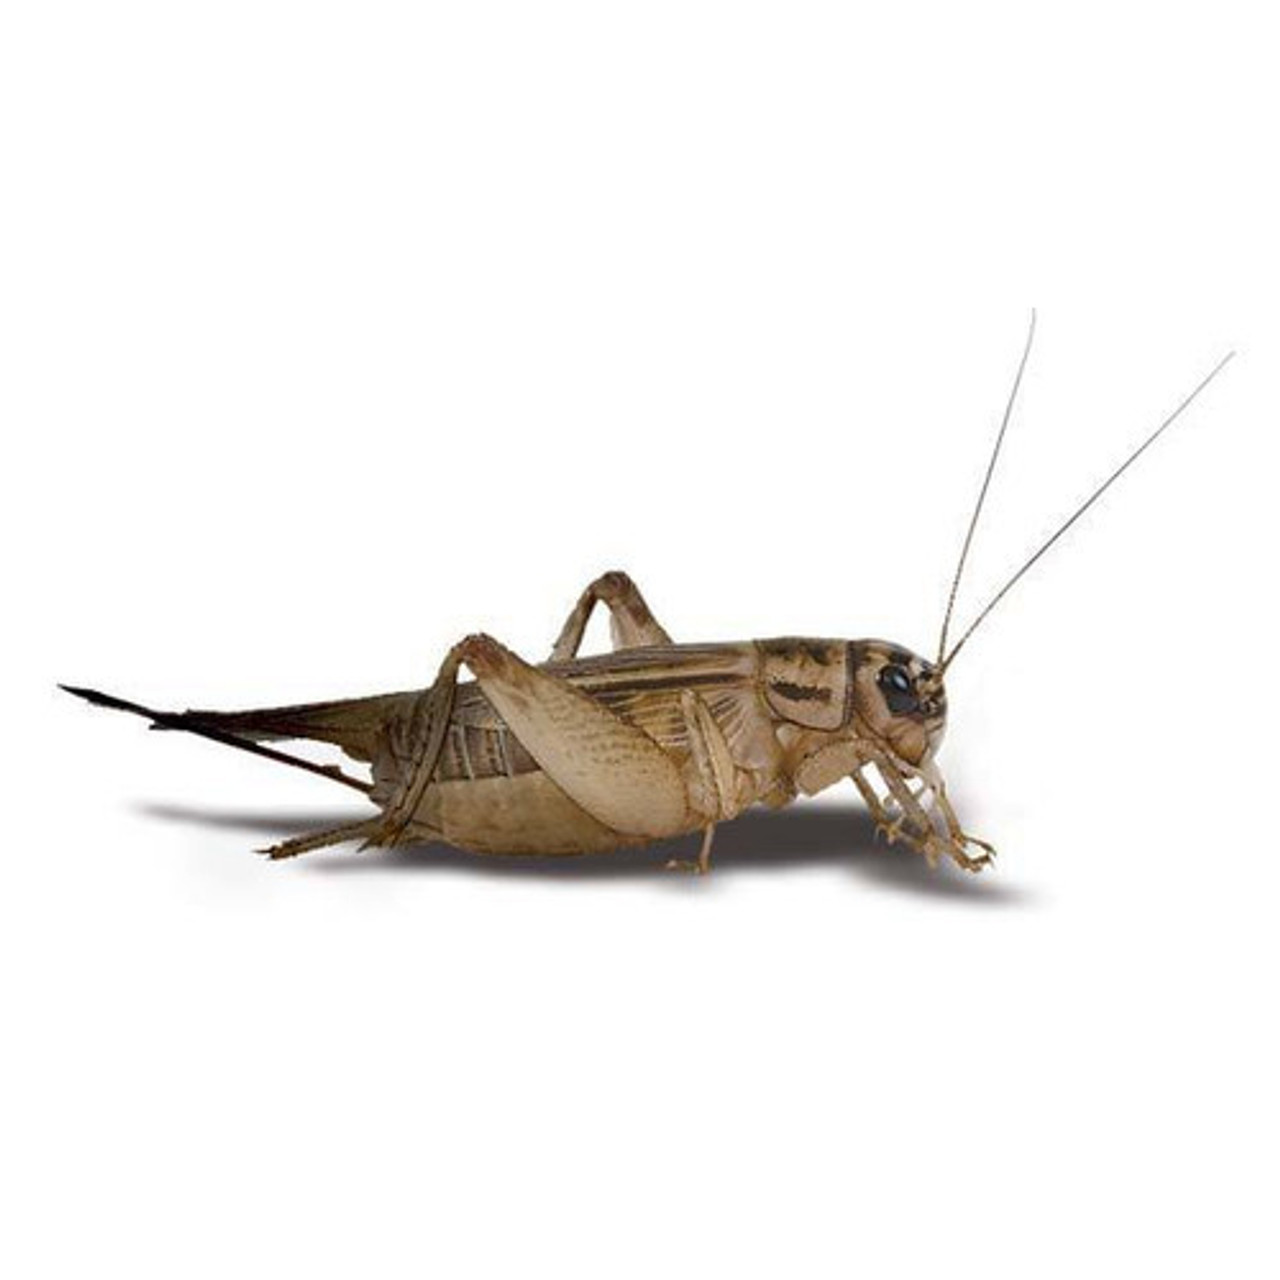 Pisces Live Crickets Large Tub Approx 25